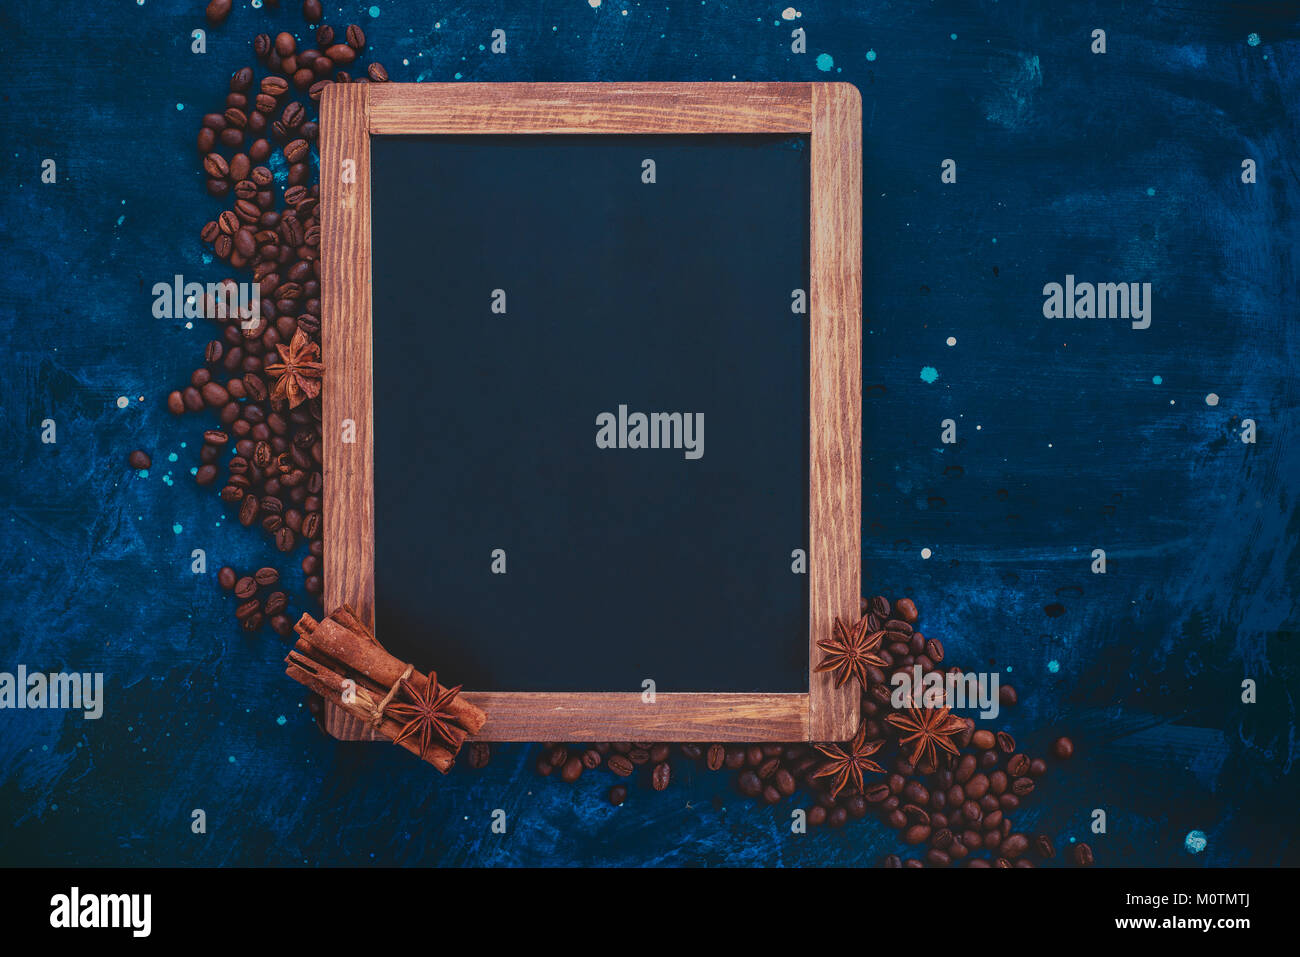 Blackboard frame with coffee beans and spices. Ingredients for making coffee in a creative flat lay concept. Stock Photo